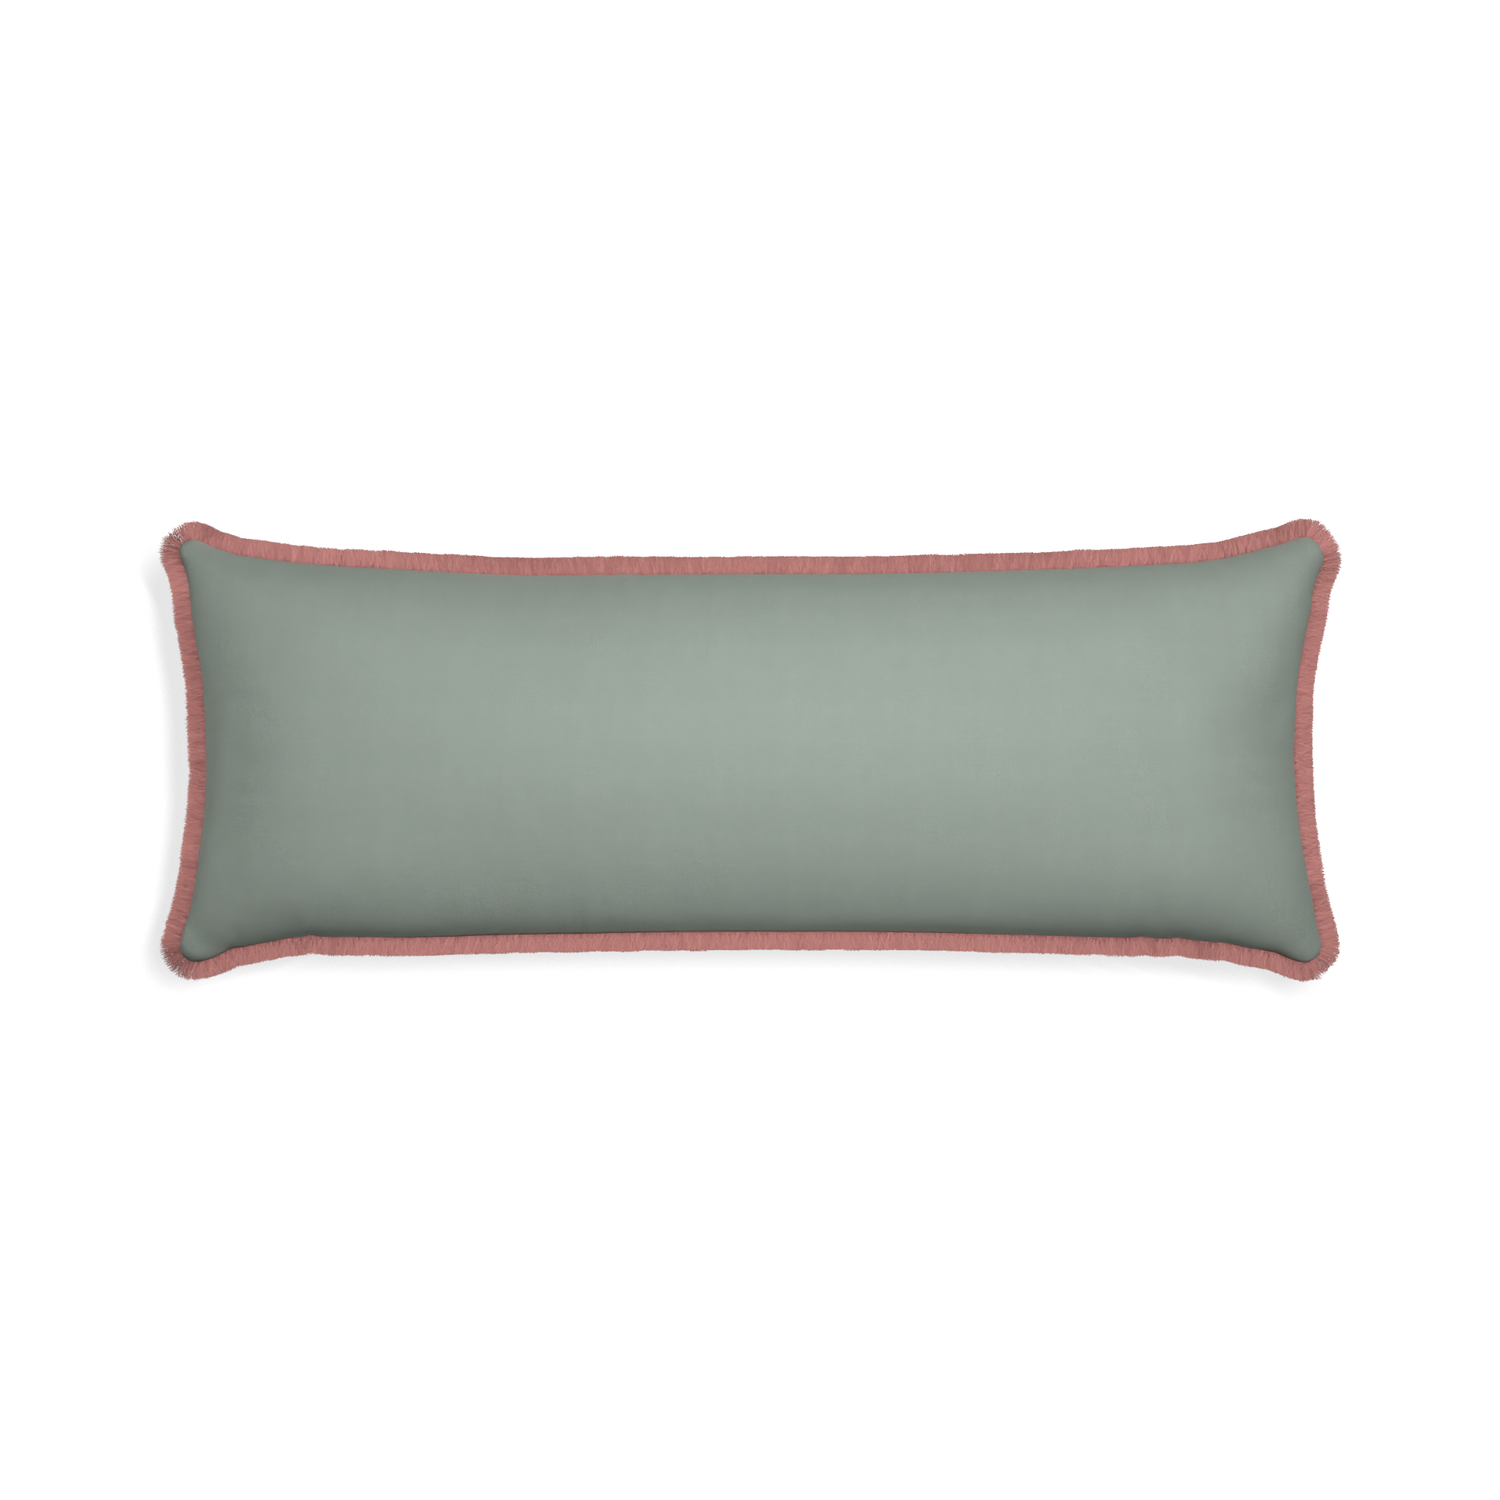 Xl-lumbar sage custom sage green cottonpillow with d fringe on white background